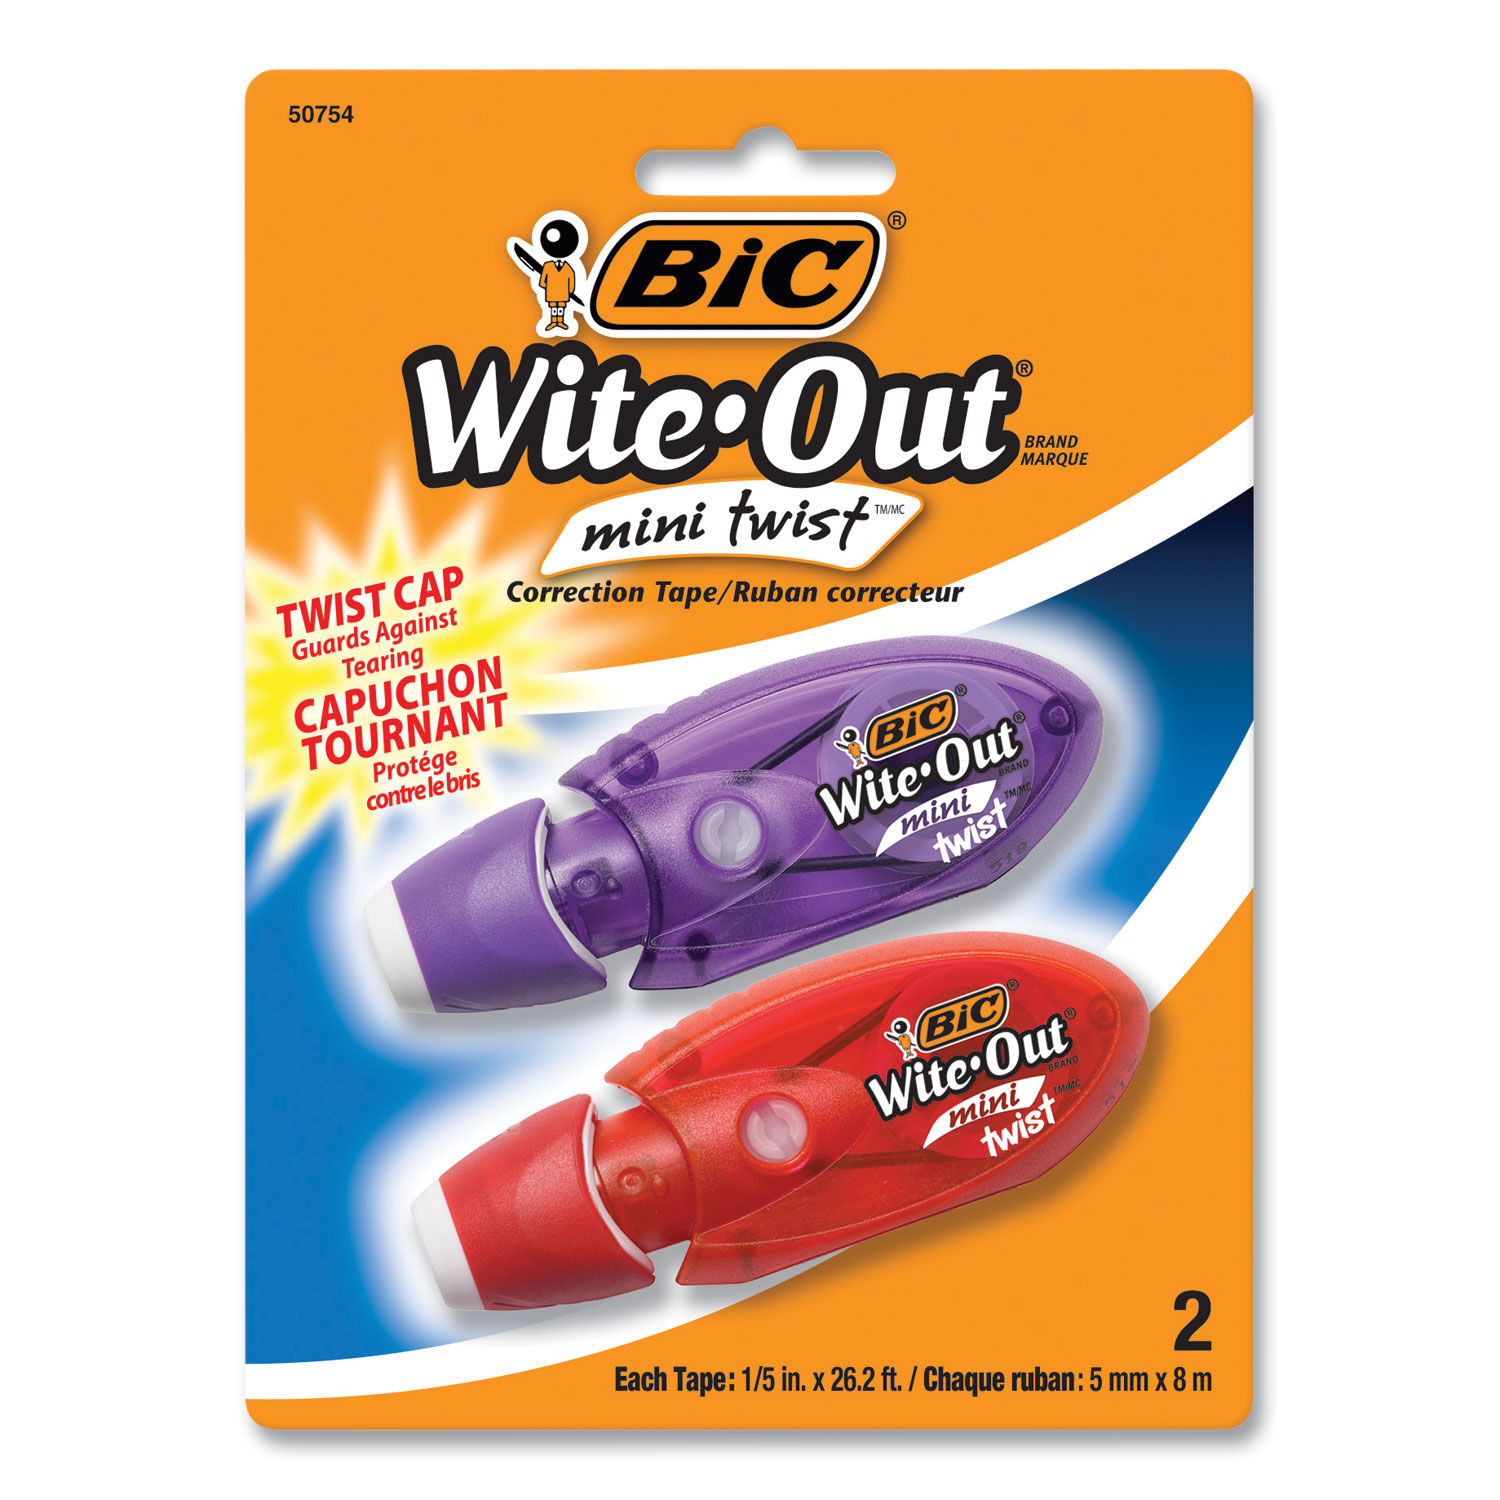 Wite-Out Mini Twist Correction Tape by BICandreg; BICWOMTP21